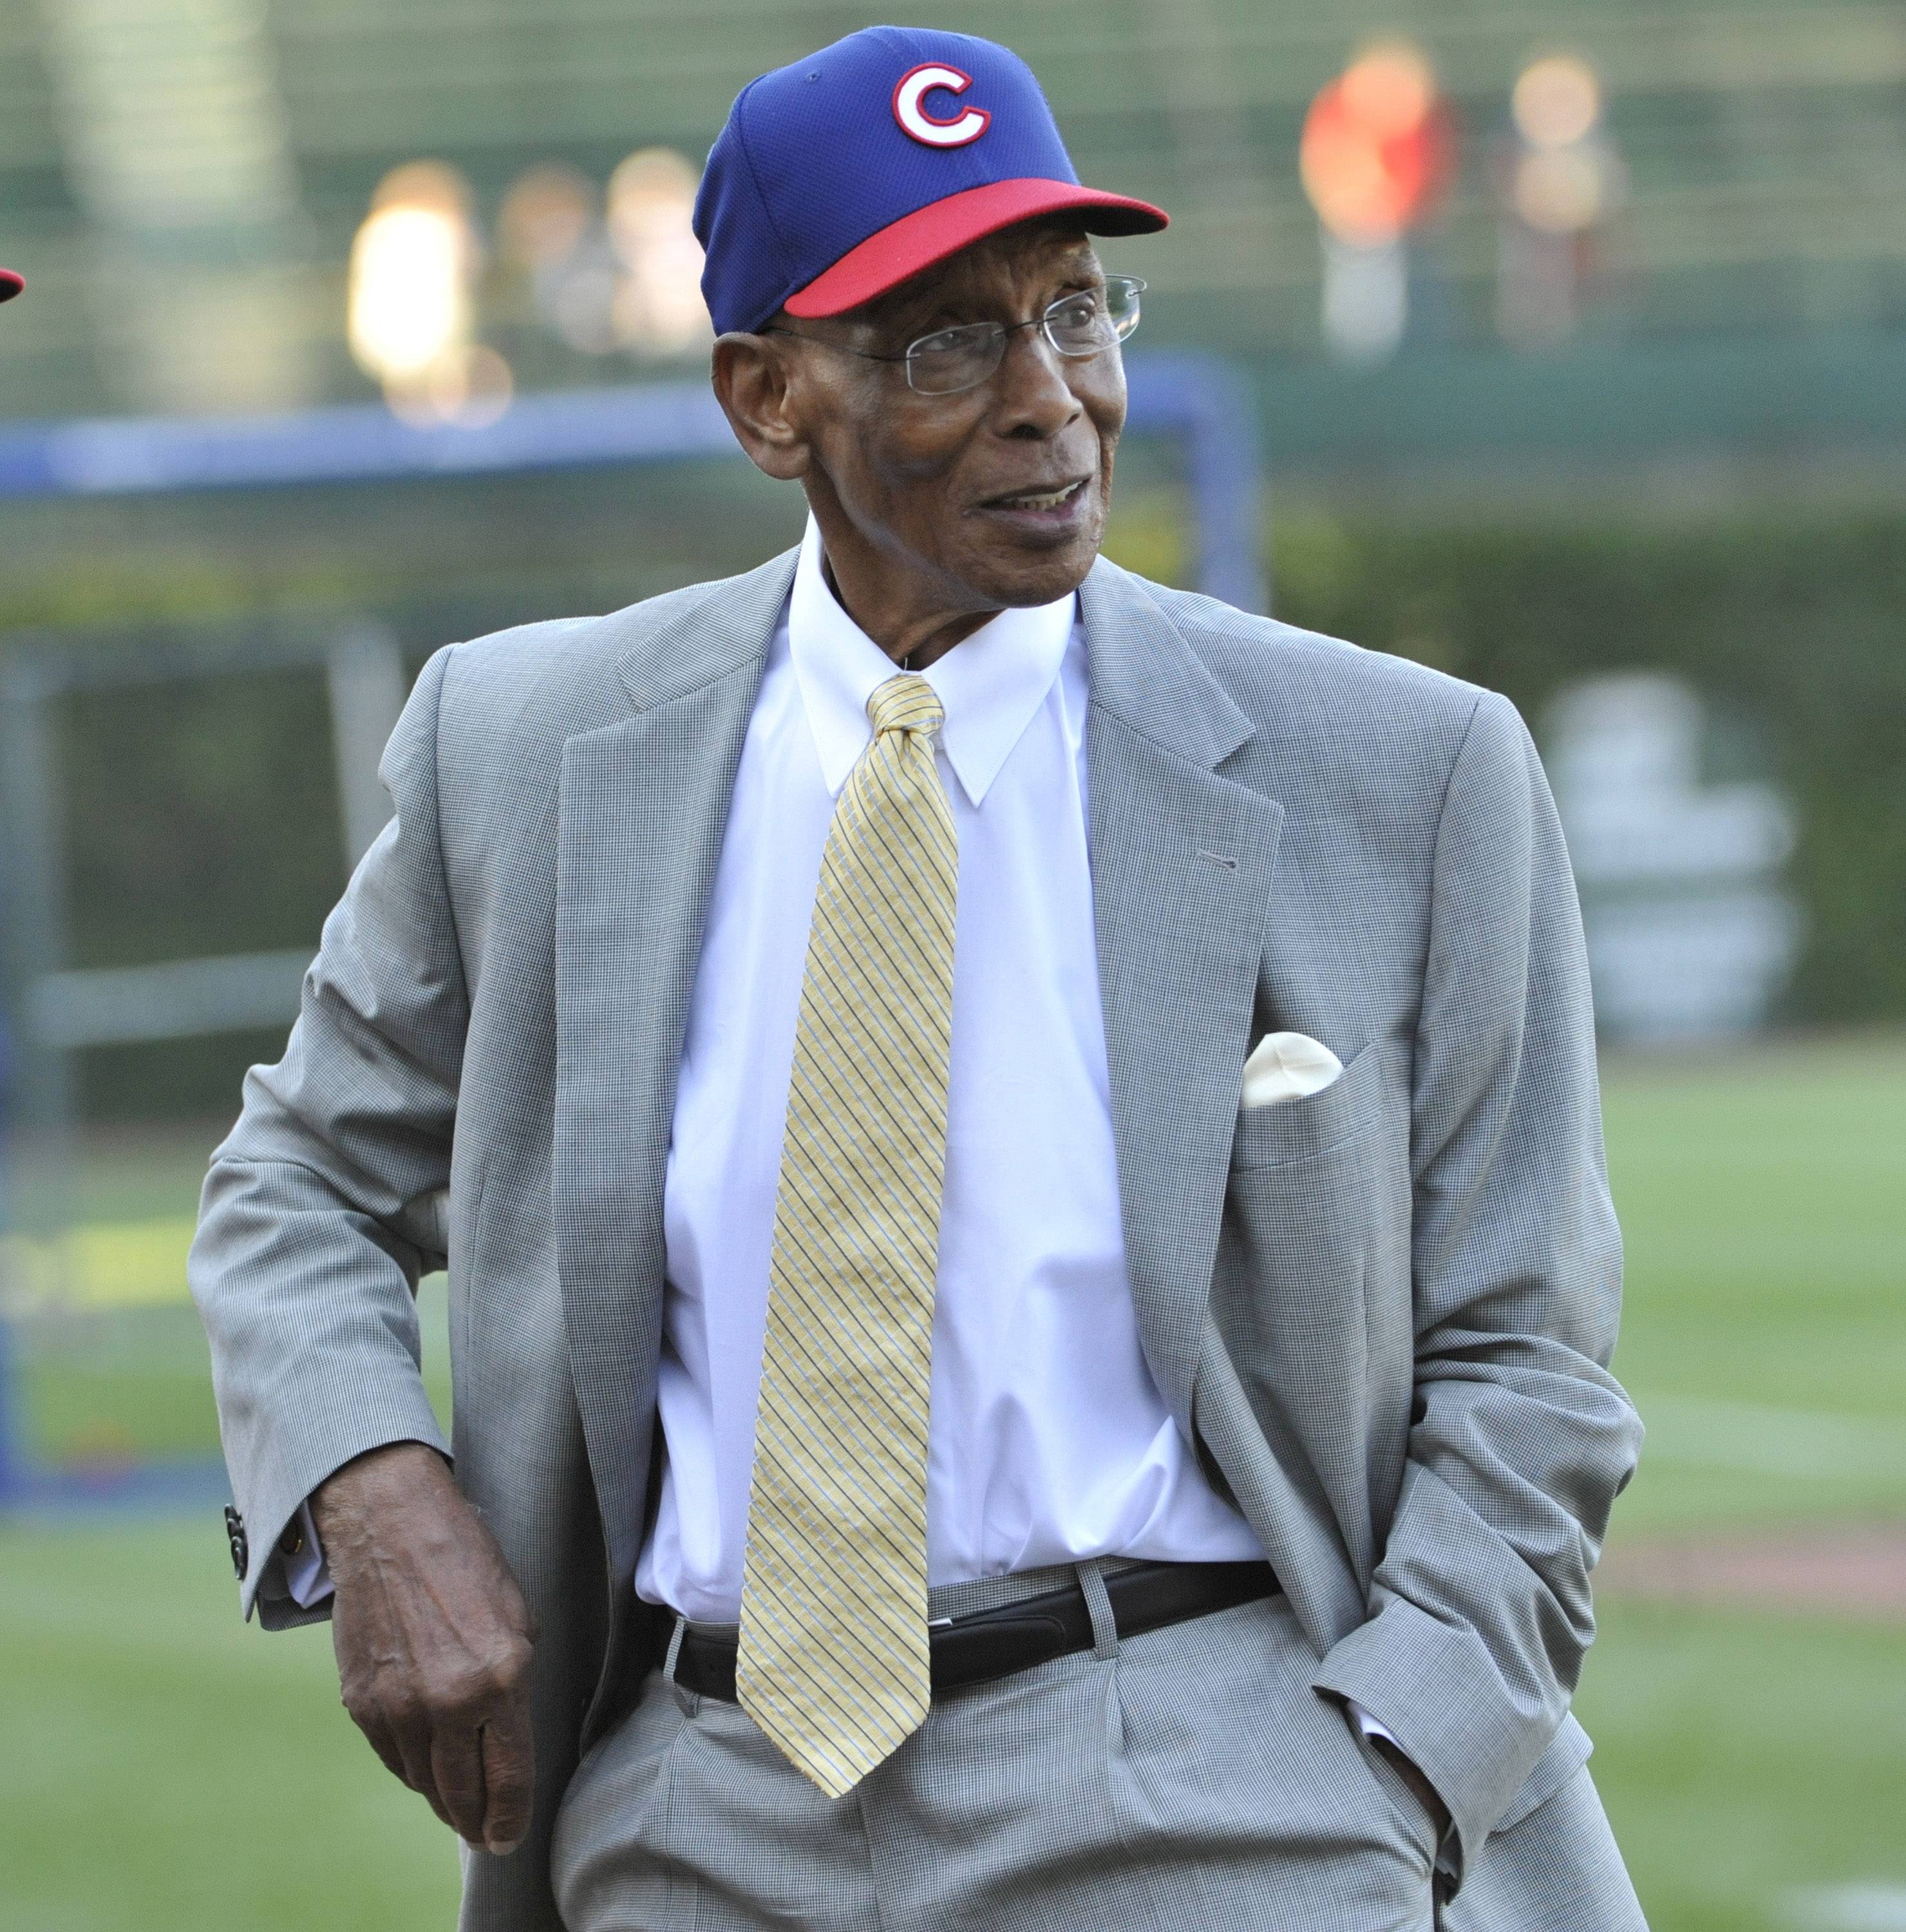 ernie banks today